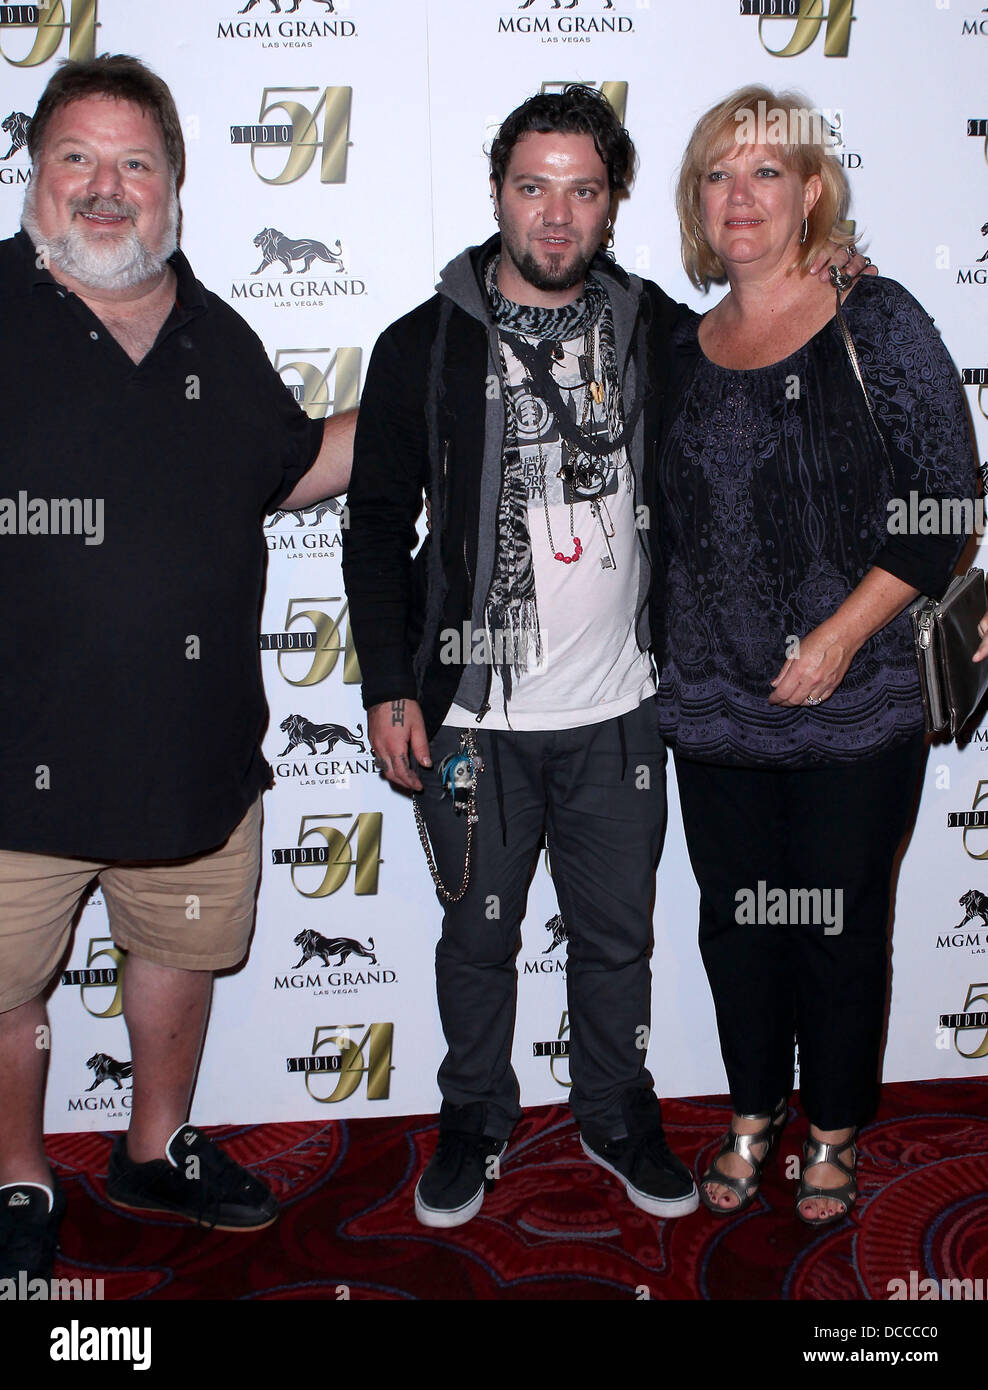 Phil Margera, Bam Margera and April Margera Jackass star Bam Margera celebrates his birthday at Studio 54 inside the MGM Grand Resort and Casino Las Vegas, Nevada - 01.10.11 Stock Photo